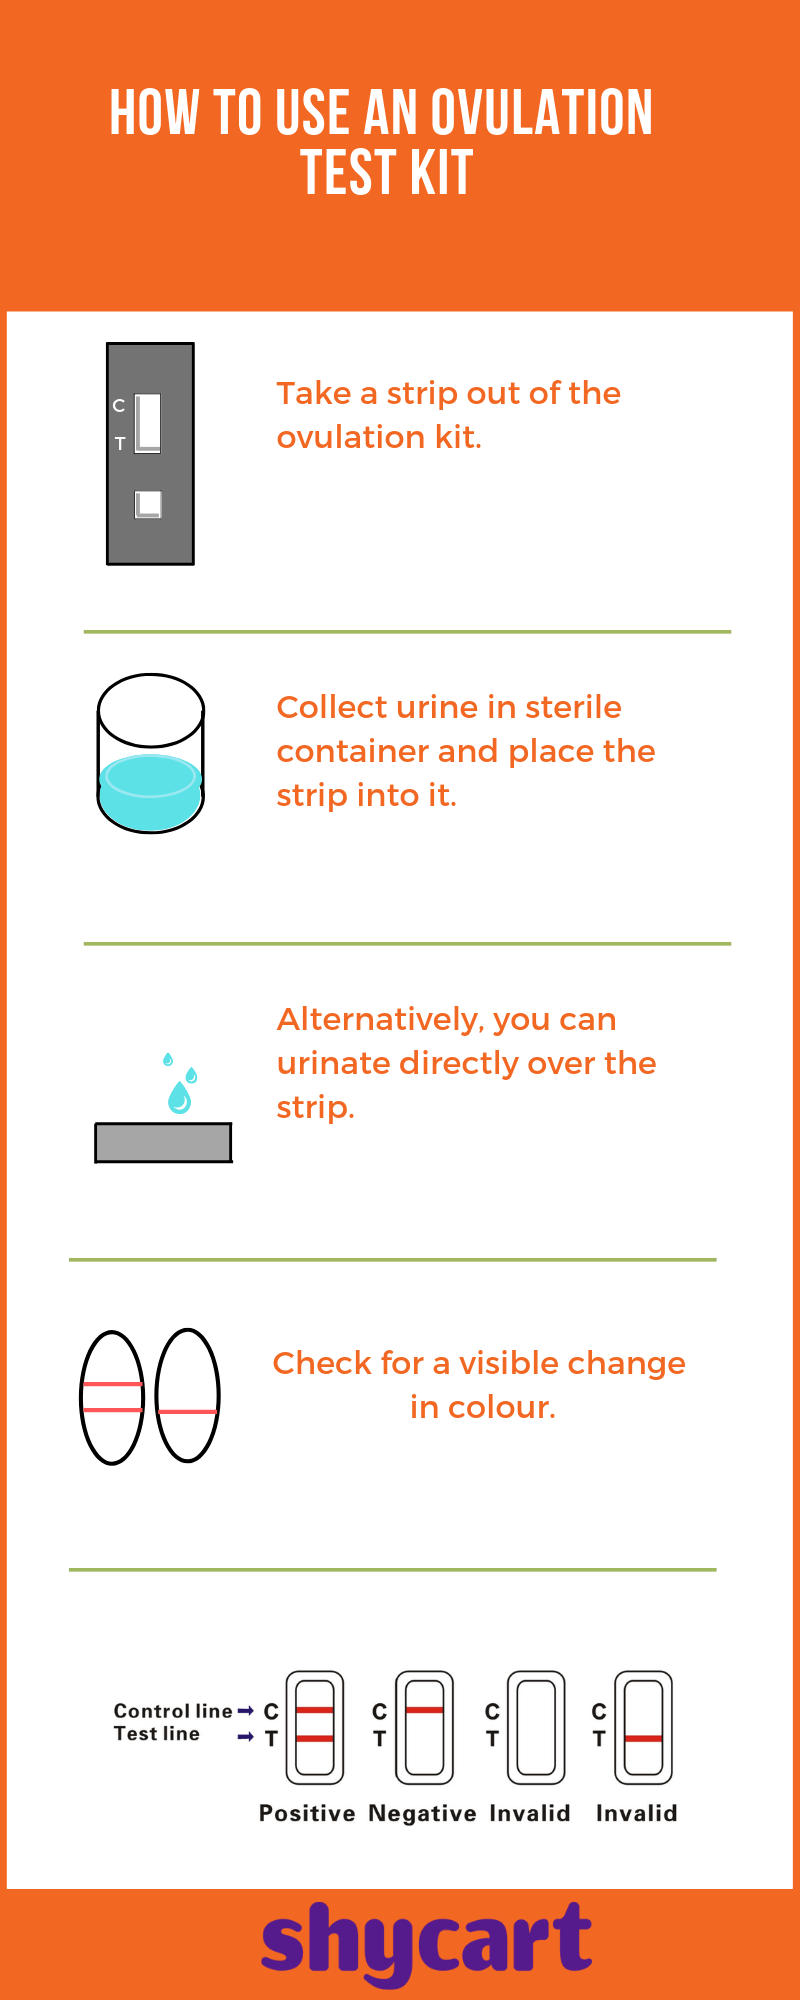 Infographic - How to use an ovulation test kit